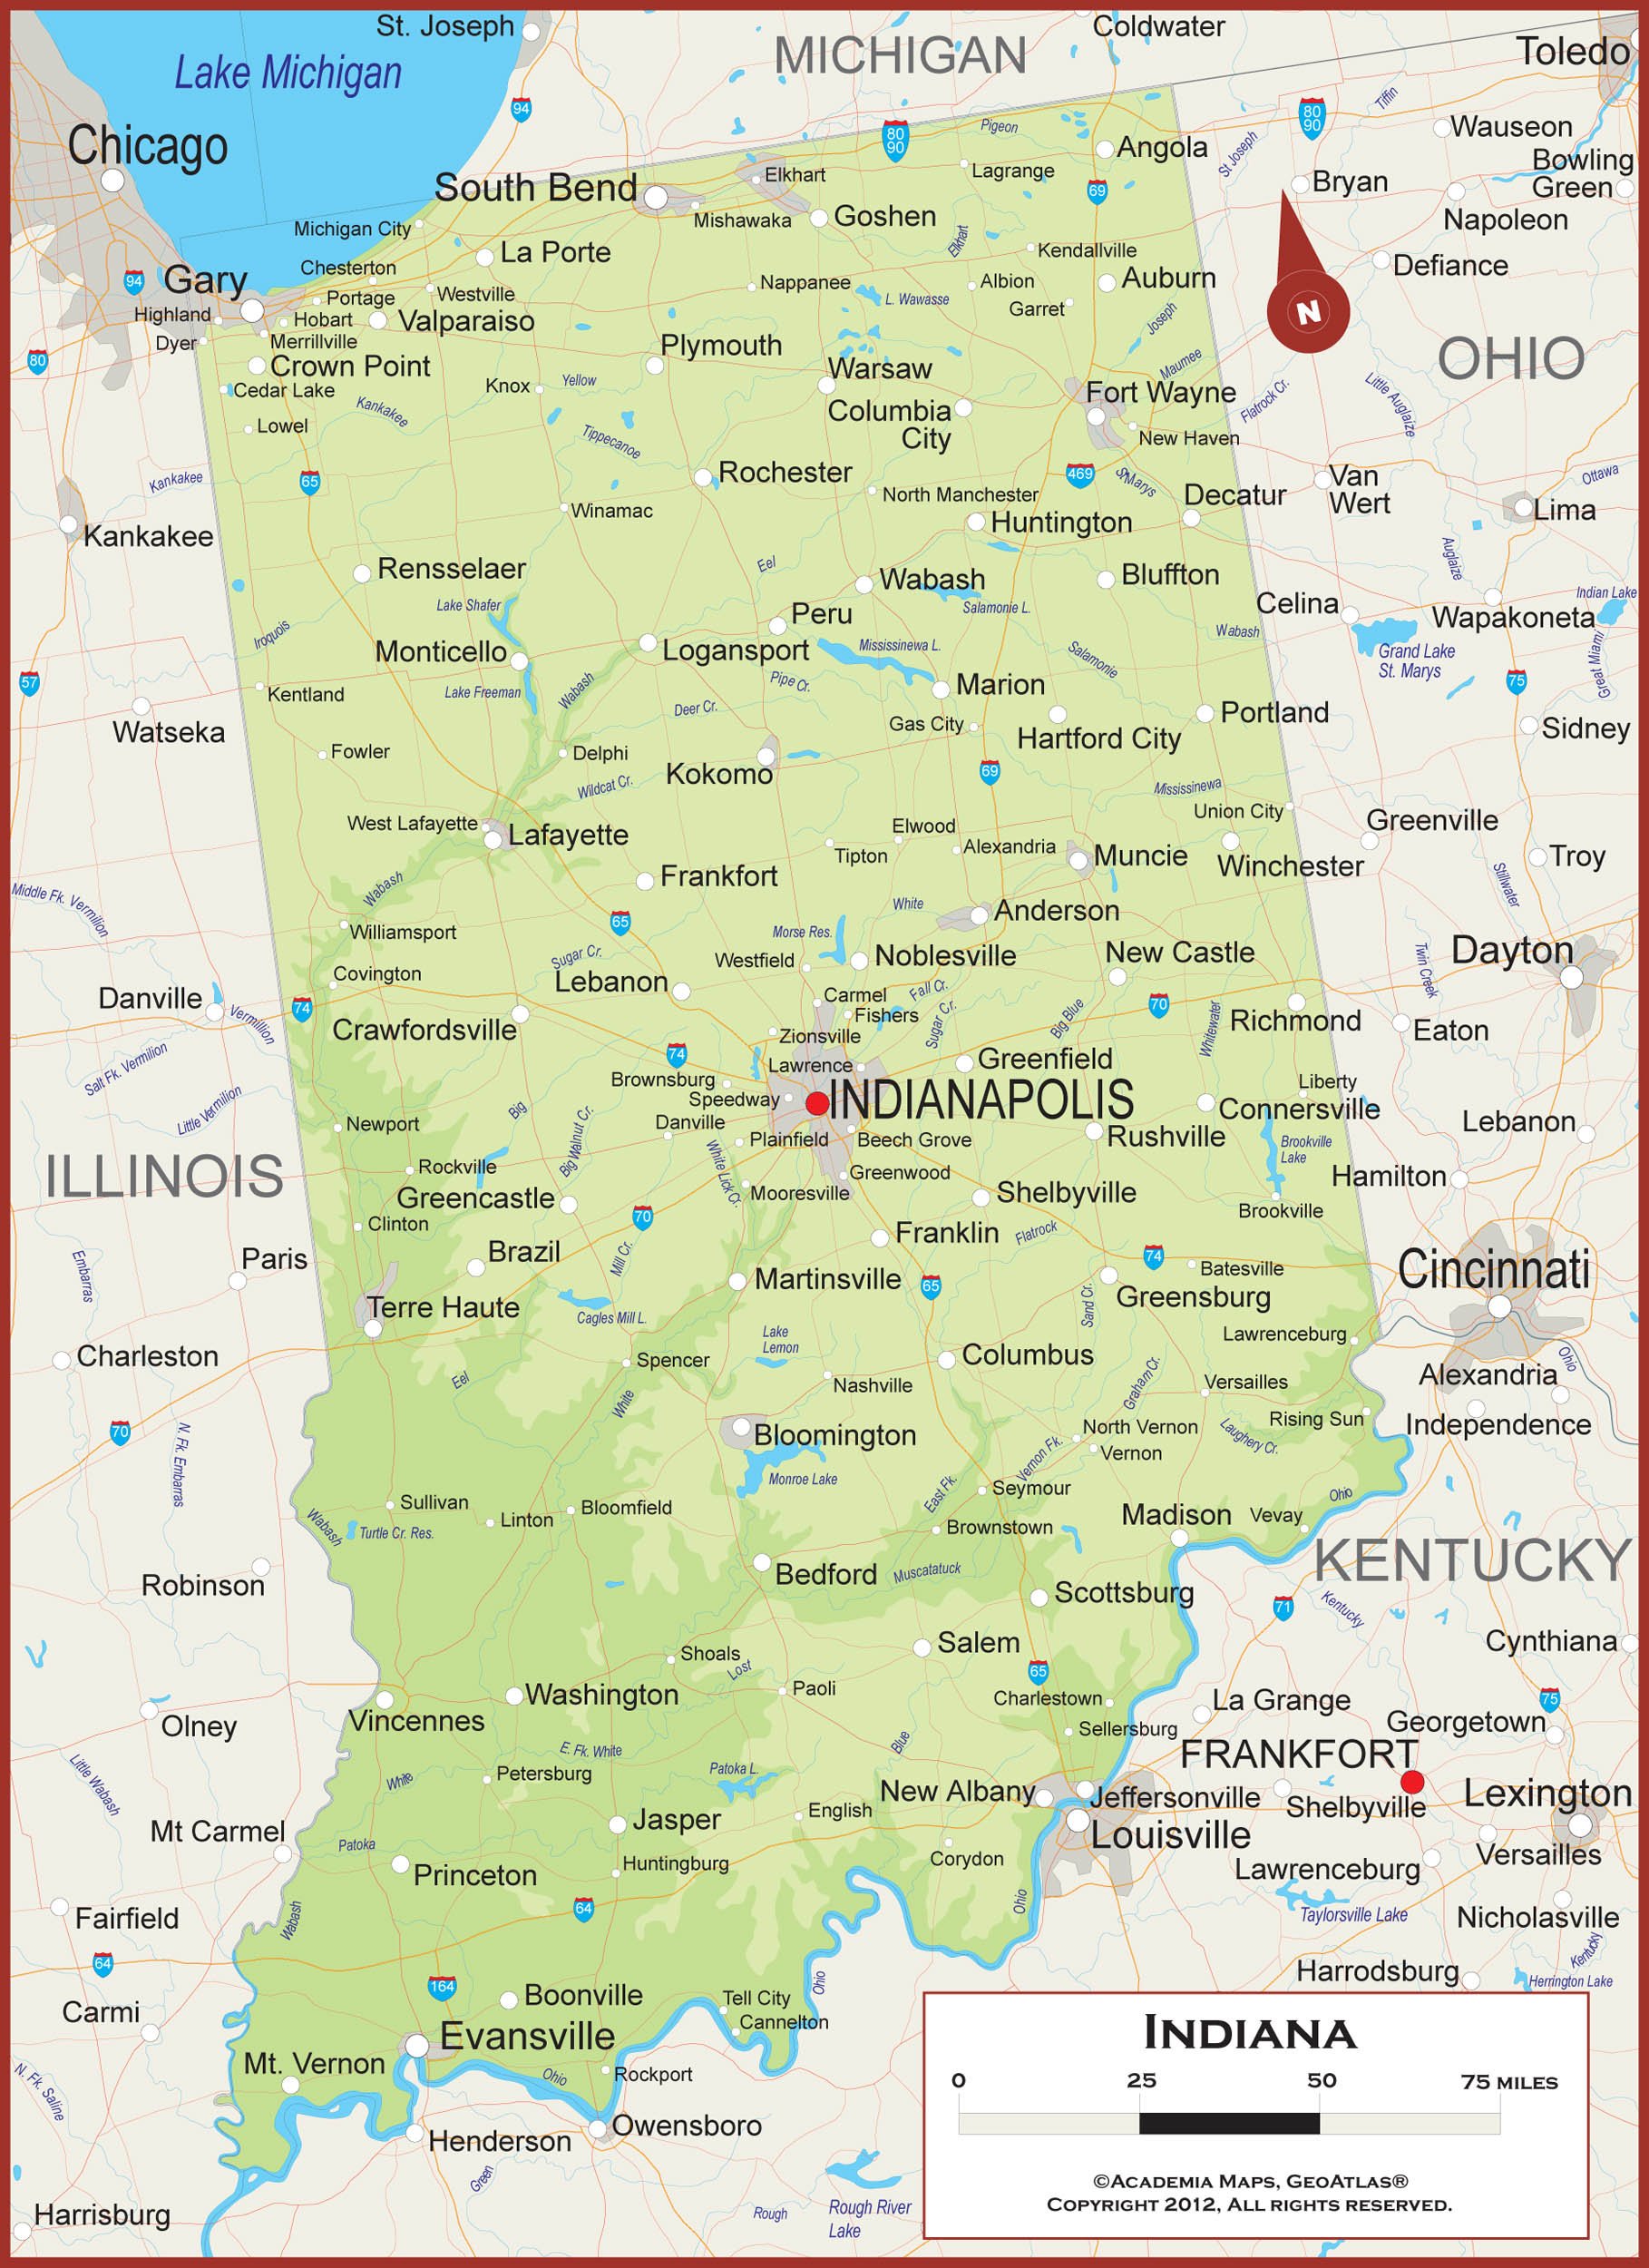 Indiana state map